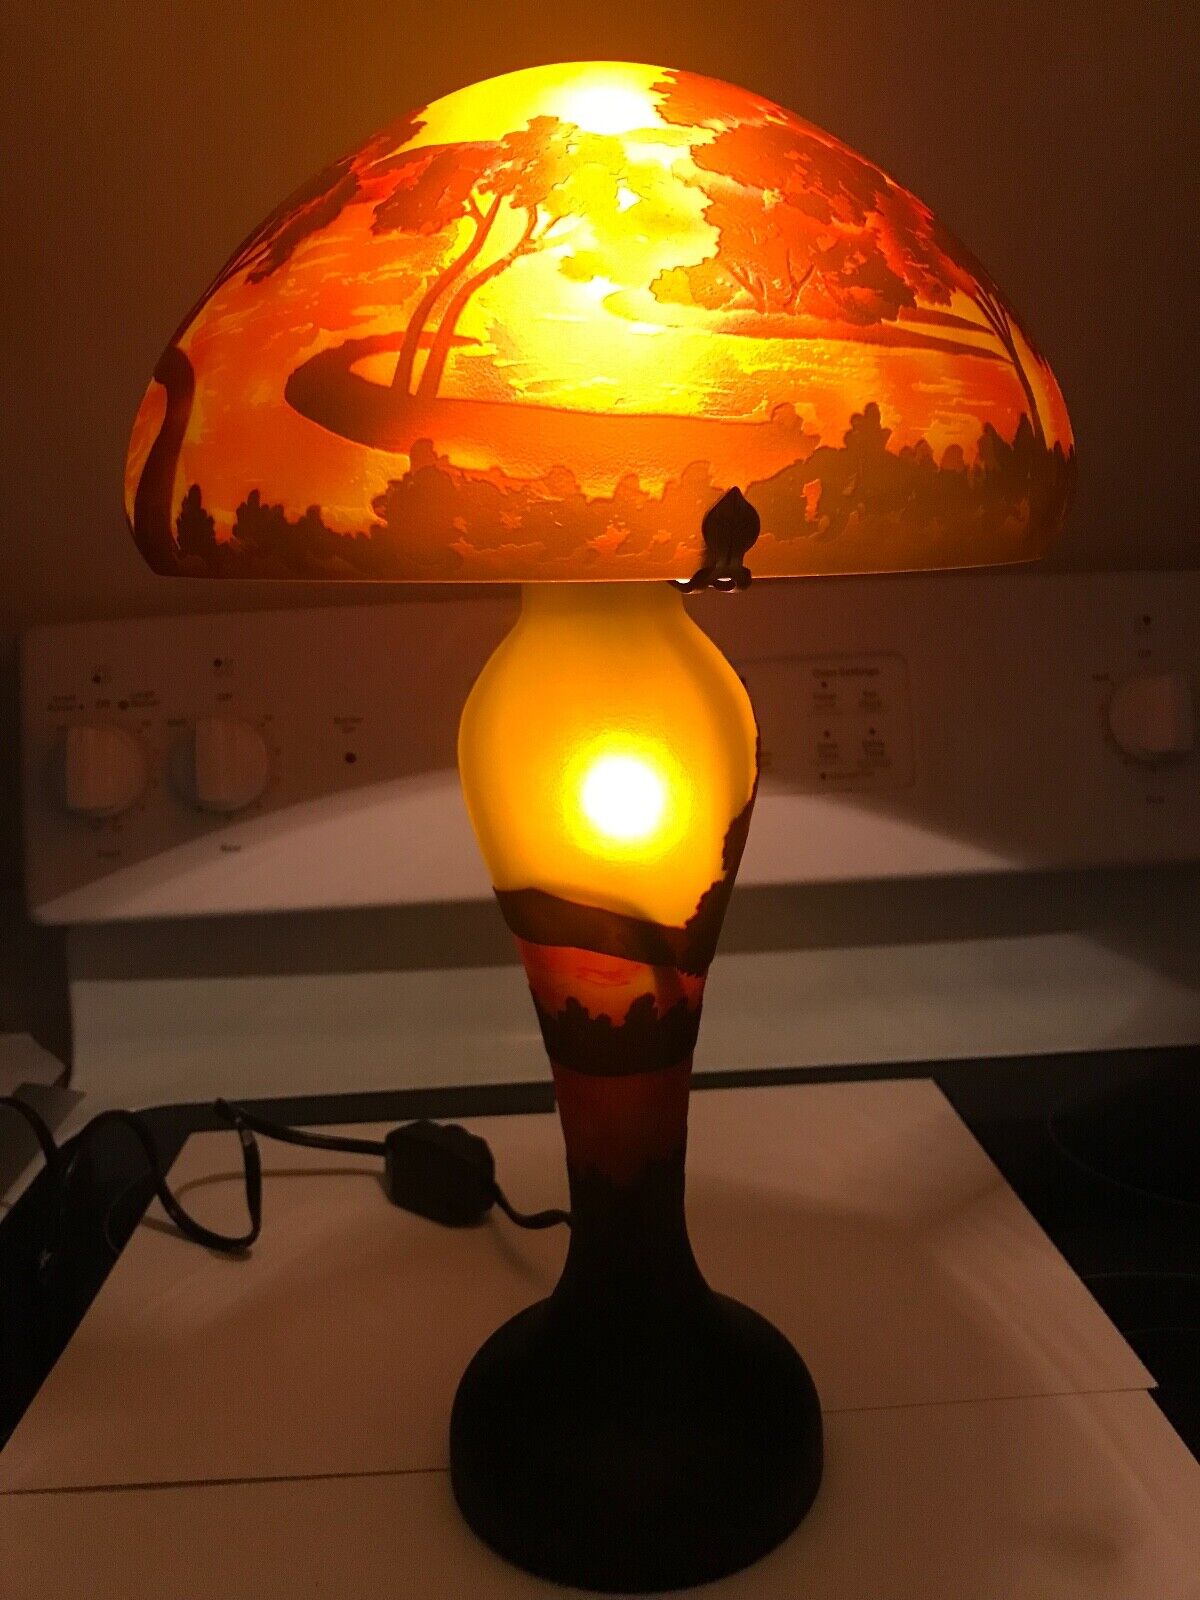 EMIILE GALLE, NEW/REPRO CAMEO GLASS LAMP, LOVELY SUNSET/FOREST/WATER SCENE